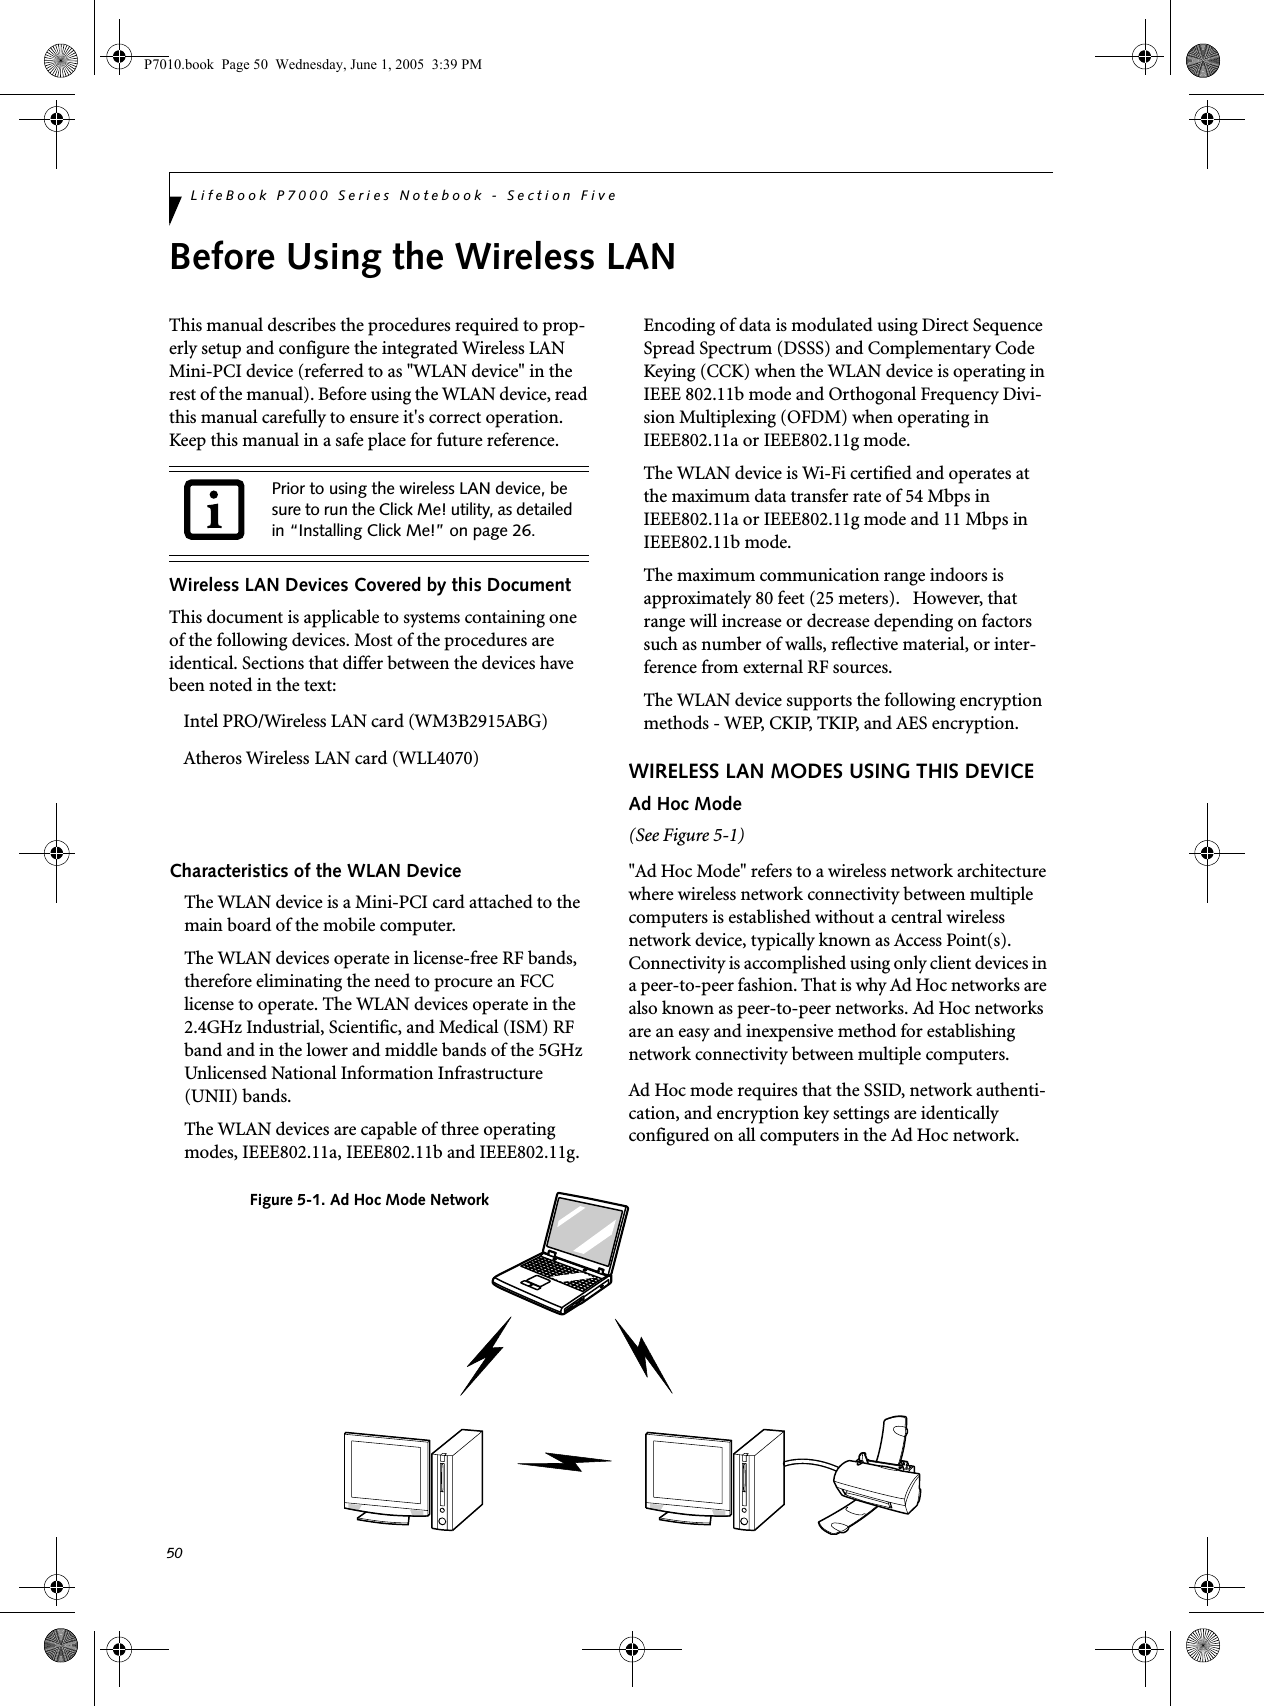 50LifeBook P7000 Series Notebook - Section FiveBefore Using the Wireless LANThis manual describes the procedures required to prop-erly setup and configure the integrated Wireless LAN Mini-PCI device (referred to as &quot;WLAN device&quot; in the rest of the manual). Before using the WLAN device, read this manual carefully to ensure it&apos;s correct operation. Keep this manual in a safe place for future reference.Wireless LAN Devices Covered by this DocumentThis document is applicable to systems containing one of the following devices. Most of the procedures are identical. Sections that differ between the devices have been noted in the text:Intel PRO/Wireless LAN card ( WM3B2915ABG) Atheros Wireless  LAN card (WLL4070)Characteristics of the WLAN DeviceThe WLAN device is a Mini-PCI card attached to the main board of the mobile computer. The WLAN devices operate in license-free RF bands, therefore eliminating the need to procure an FCC license to operate. The WLAN devices operate in the 2.4GHz Industrial, Scientific, and Medical (ISM) RF band and in the lower and middle bands of the 5GHz Unlicensed National Information Infrastructure (UNII) bands. The WLAN devices are capable of three operating modes, IEEE802.11a, IEEE802.11b and IEEE802.11g. Encoding of data is modulated using Direct Sequence Spread Spectrum (DSSS) and Complementary Code Keying (CCK) when the WLAN device is operating in IEEE 802.11b mode and Orthogonal Frequency Divi-sion Multiplexing (OFDM) when operating in IEEE802.11a or IEEE802.11g mode. The WLAN device is Wi-Fi certified and operates at the maximum data transfer rate of 54 Mbps in IEEE802.11a or IEEE802.11g mode and 11 Mbps in IEEE802.11b mode.The maximum communication range indoors is approximately 80 feet (25 meters).   However, that range will increase or decrease depending on factors such as number of walls, reflective material, or inter-ference from external RF sources.The WLAN device supports the following encryption methods - WEP, CKIP, TKIP, and AES encryption.WIRELESS LAN MODES USING THIS DEVICEAd Hoc Mode (See Figure 5-1)&quot;Ad Hoc Mode&quot; refers to a wireless network architecture where wireless network connectivity between multiple computers is established without a central wireless network device, typically known as Access Point(s). Connectivity is accomplished using only client devices in a peer-to-peer fashion. That is why Ad Hoc networks are also known as peer-to-peer networks. Ad Hoc networks are an easy and inexpensive method for establishing network connectivity between multiple computers.Ad Hoc mode requires that the SSID, network authenti-cation, and encryption key settings are identically configured on all computers in the Ad Hoc network. Prior to using the wireless LAN device, be sure to run the Click Me! utility, as detailed in “Installing Click Me!” on page 26.Figure 5-1. Ad Hoc Mode NetworkP7010.book  Page 50  Wednesday, June 1, 2005  3:39 PM